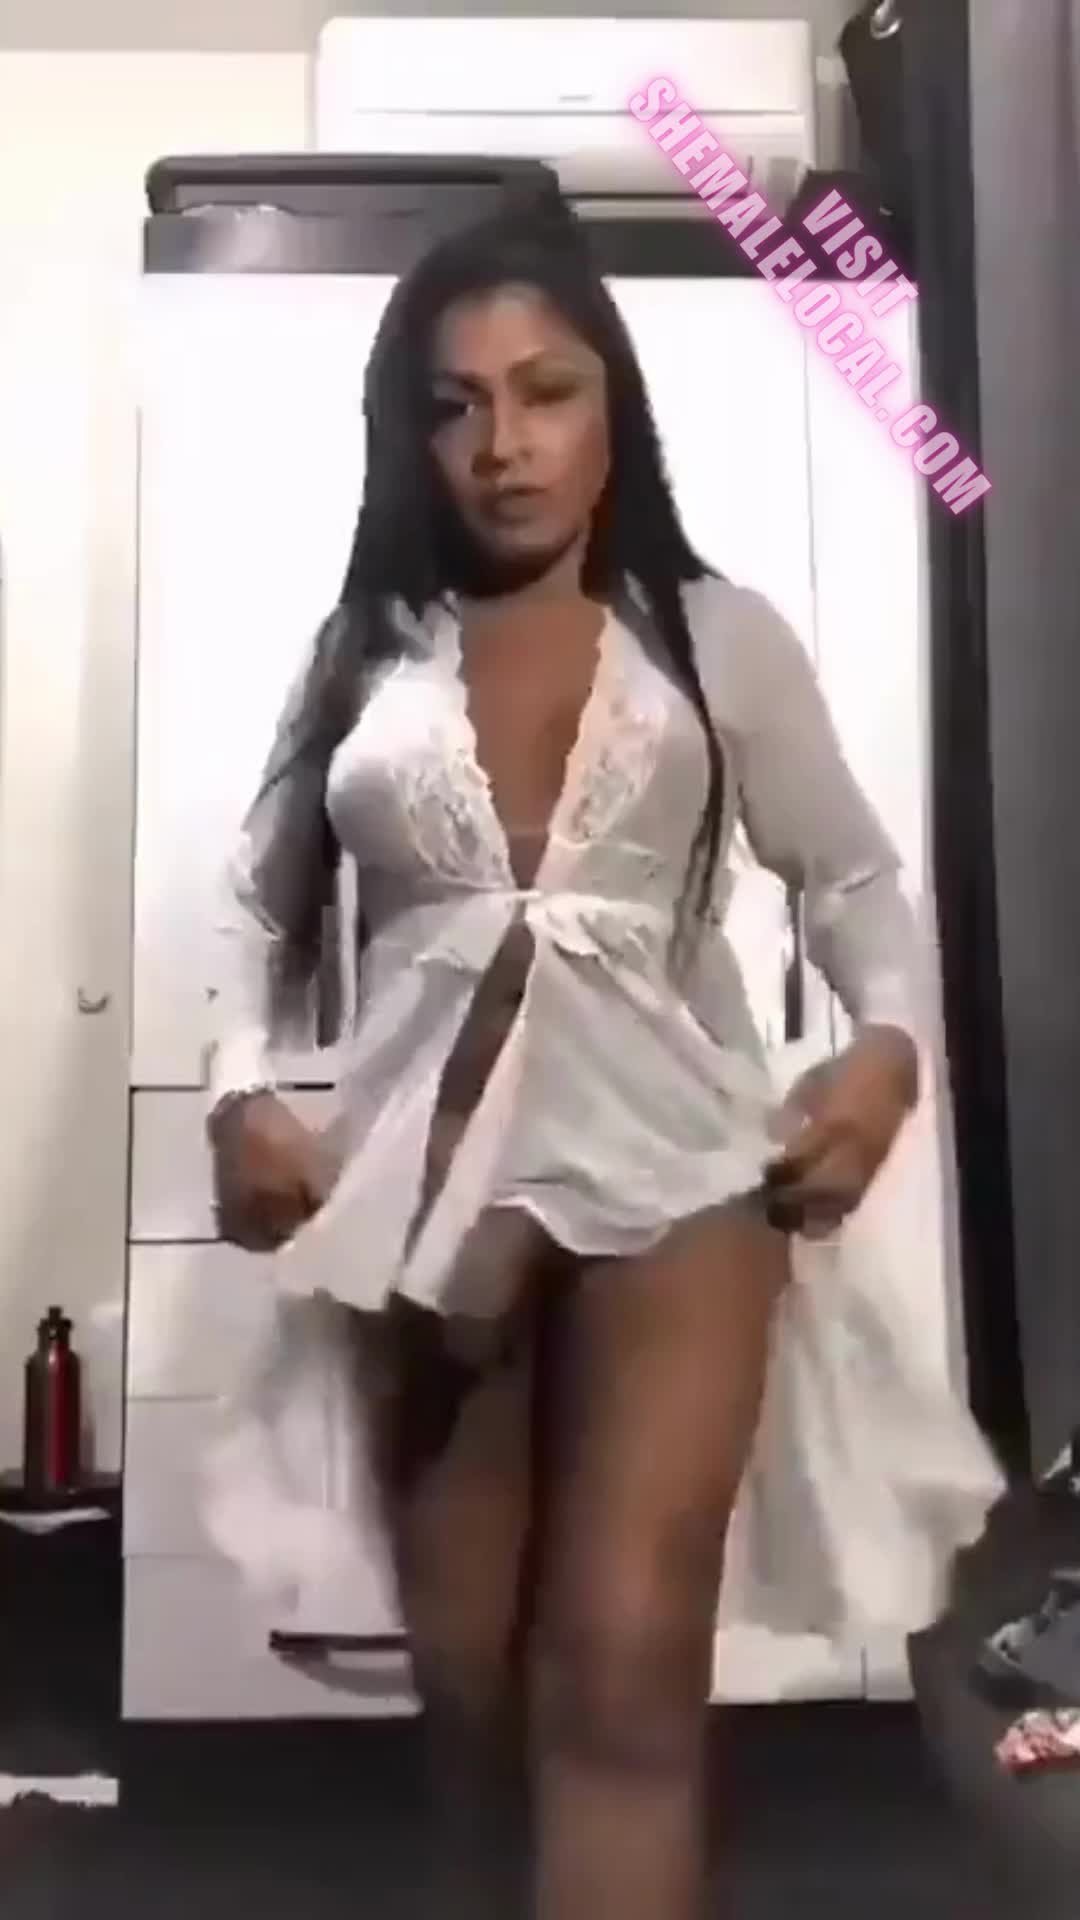 Video post by ShemaleTube